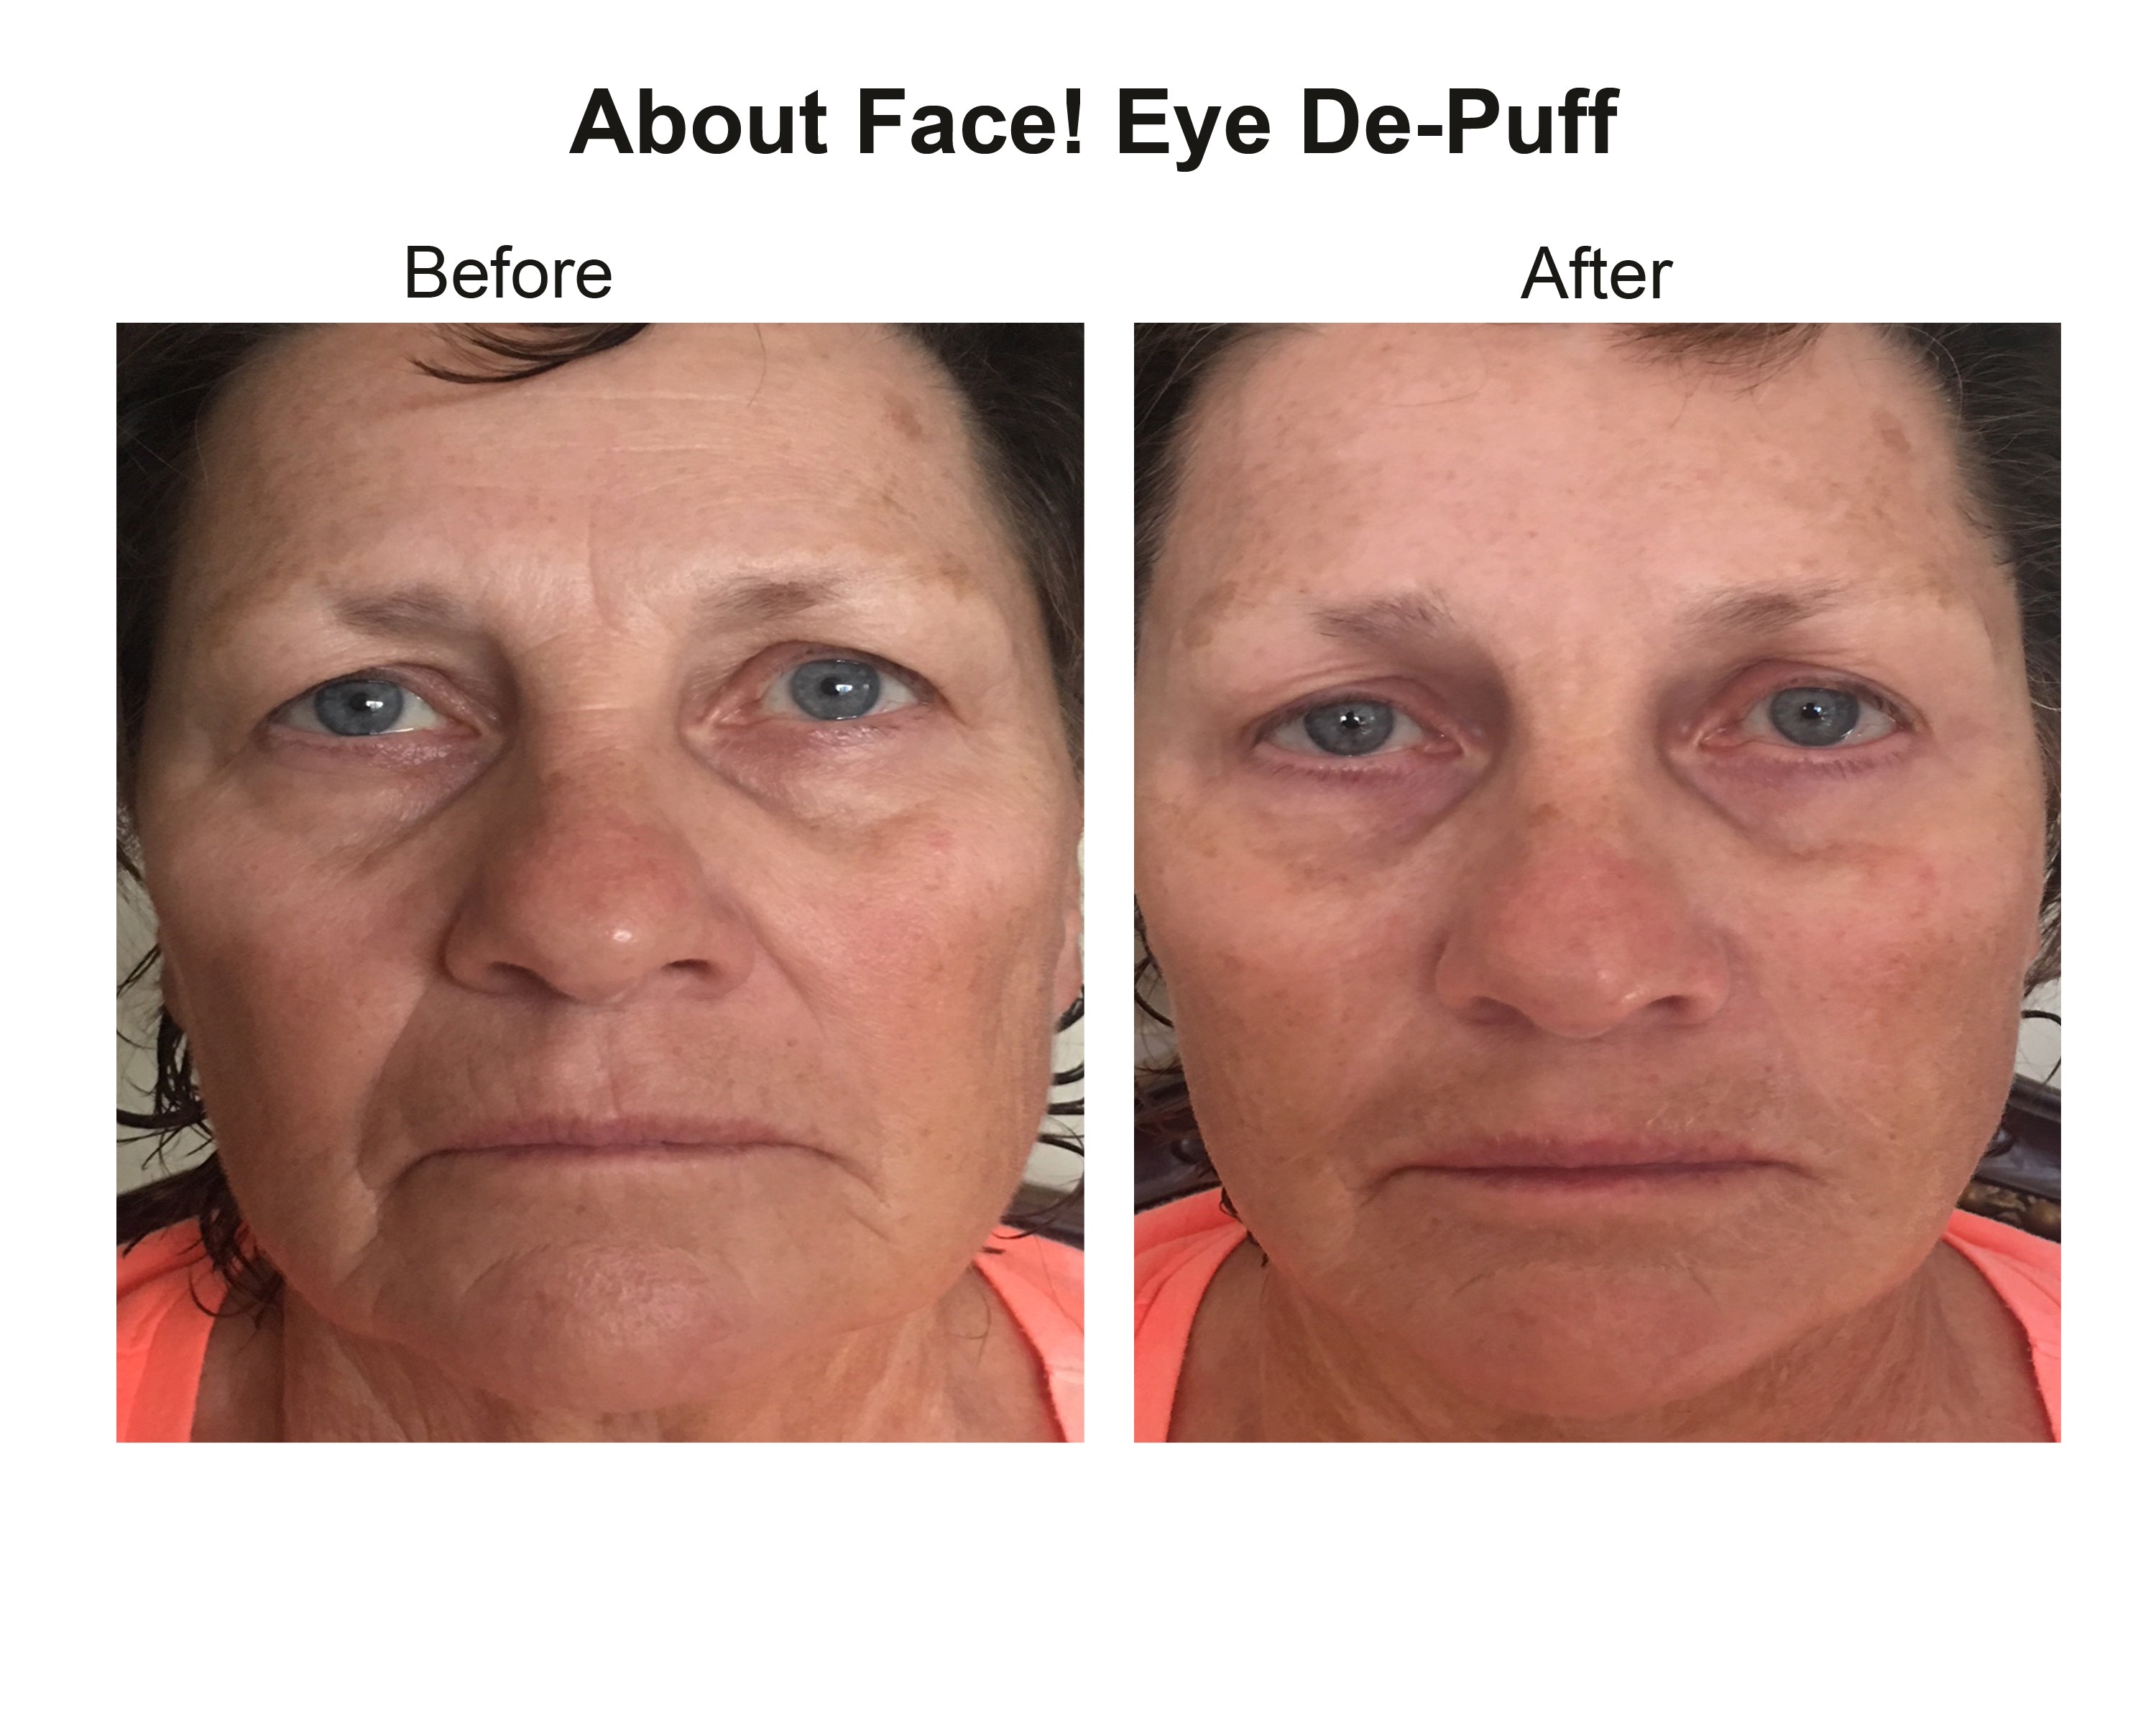 Before and After Results of About Face - Eye De Puff